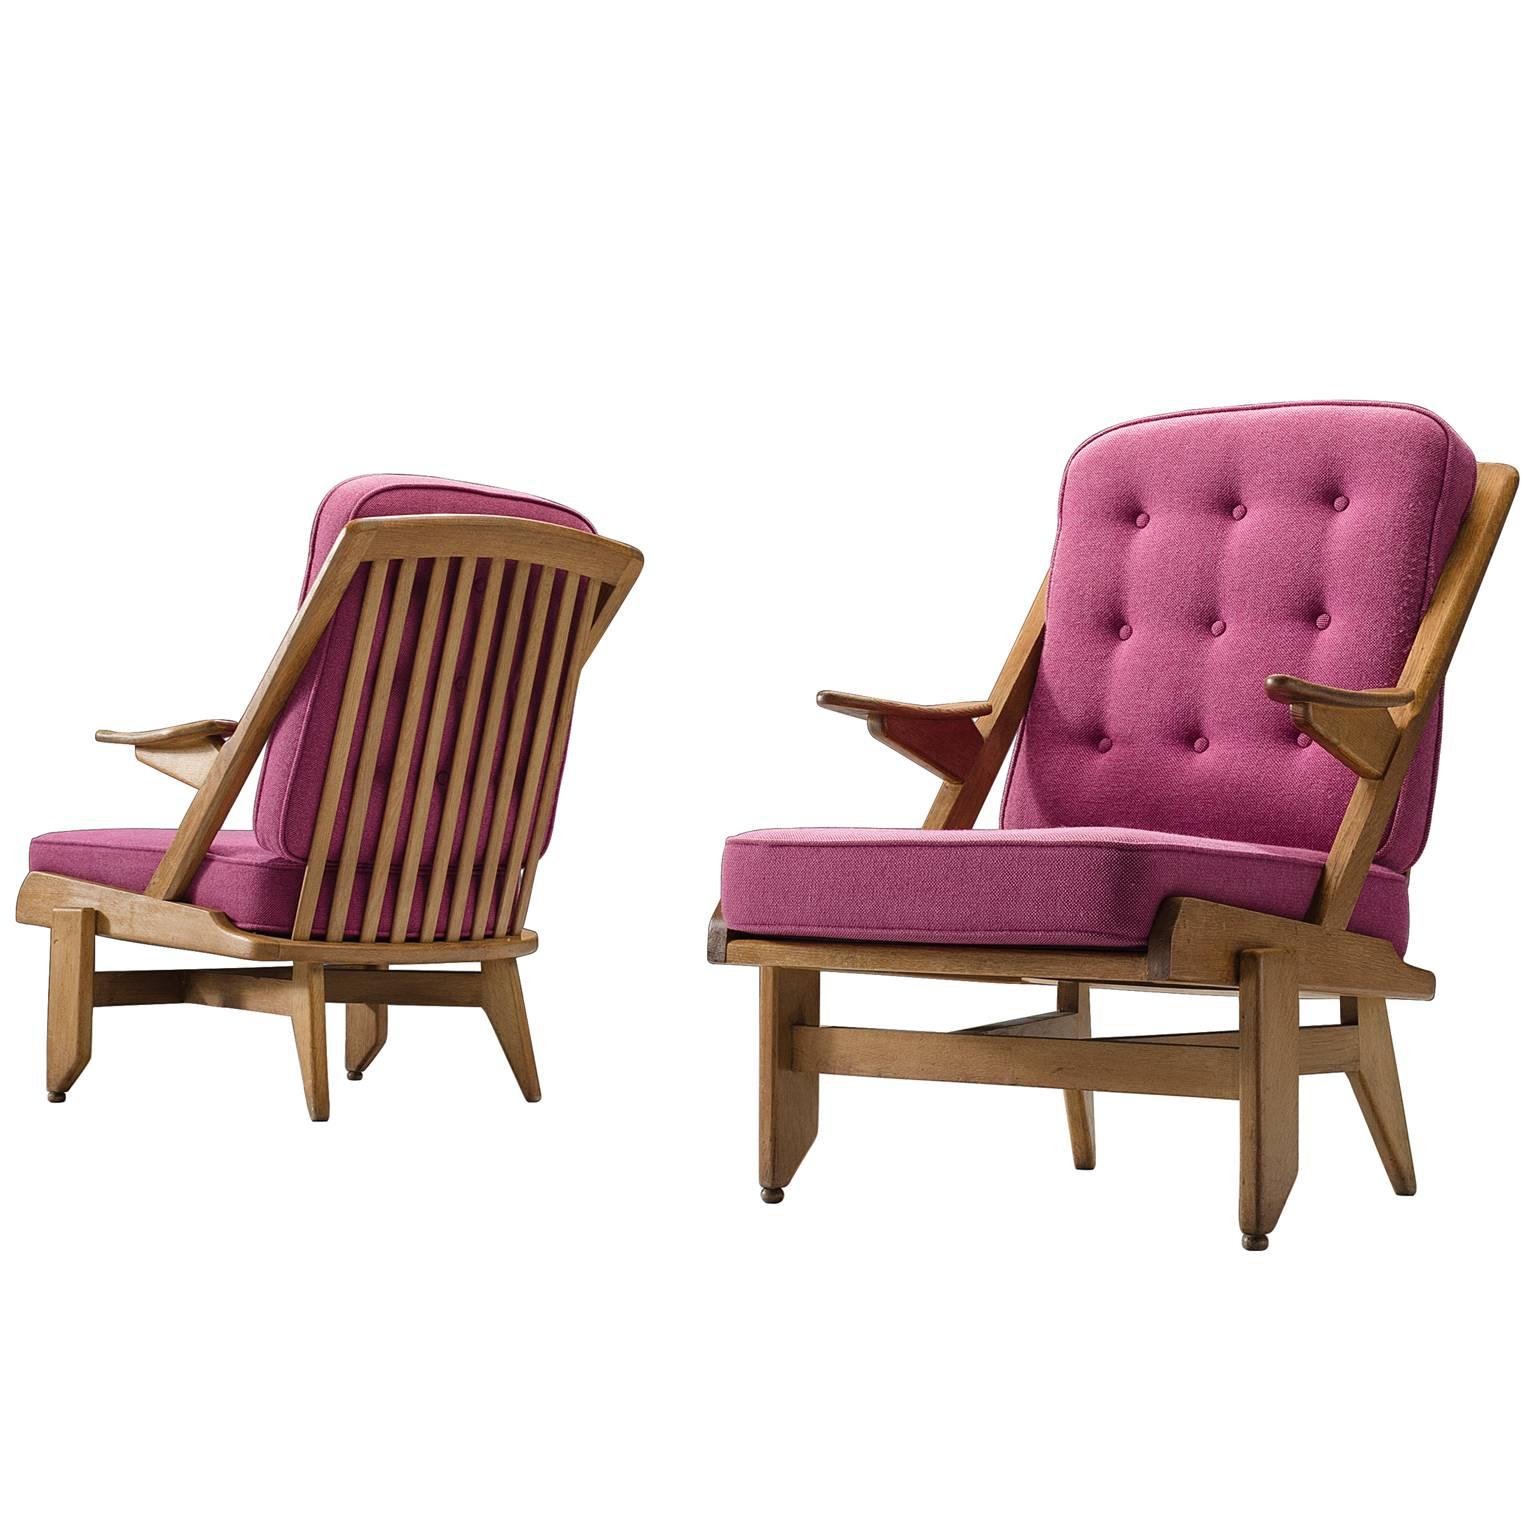 Pair of Pink Guillerme and Chambron Lounge Chairs